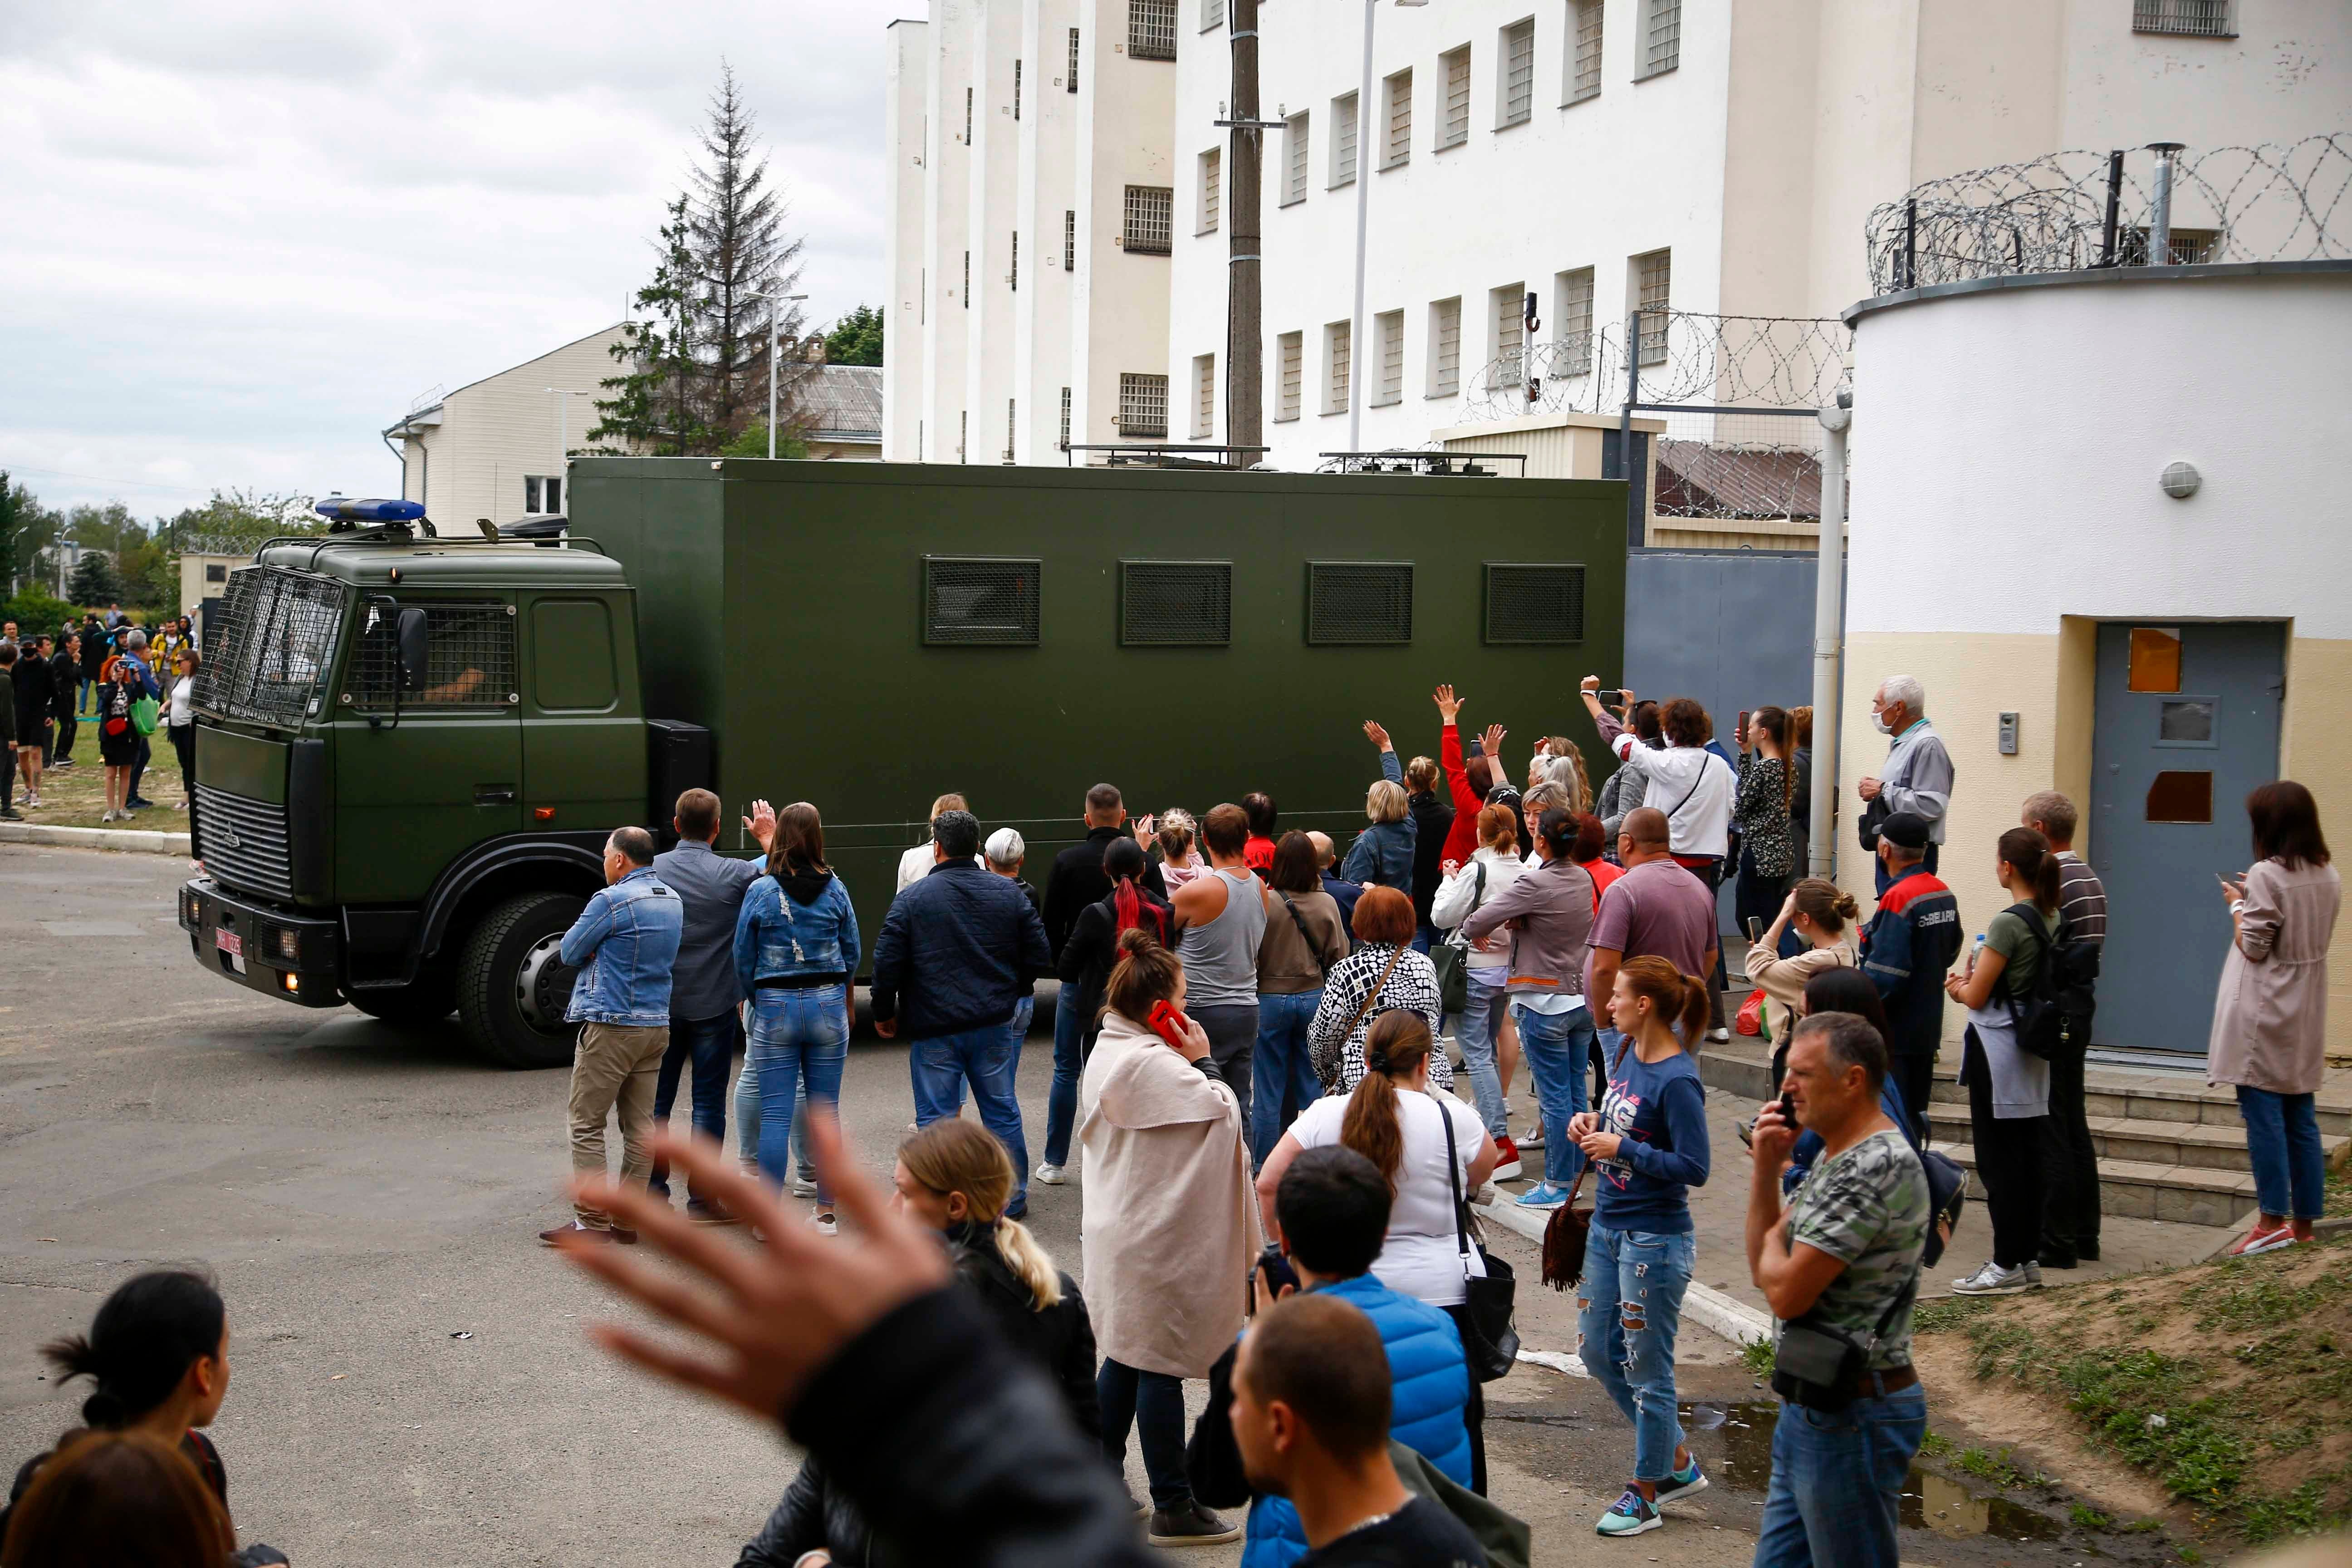 Friends and relatives of those detained during a mass rally following the disputed results of the presidential election gather at a detention center as a police bus drives out of the gate in Minsk, Belarus, Wednesday, Aug. 12, 2020.  